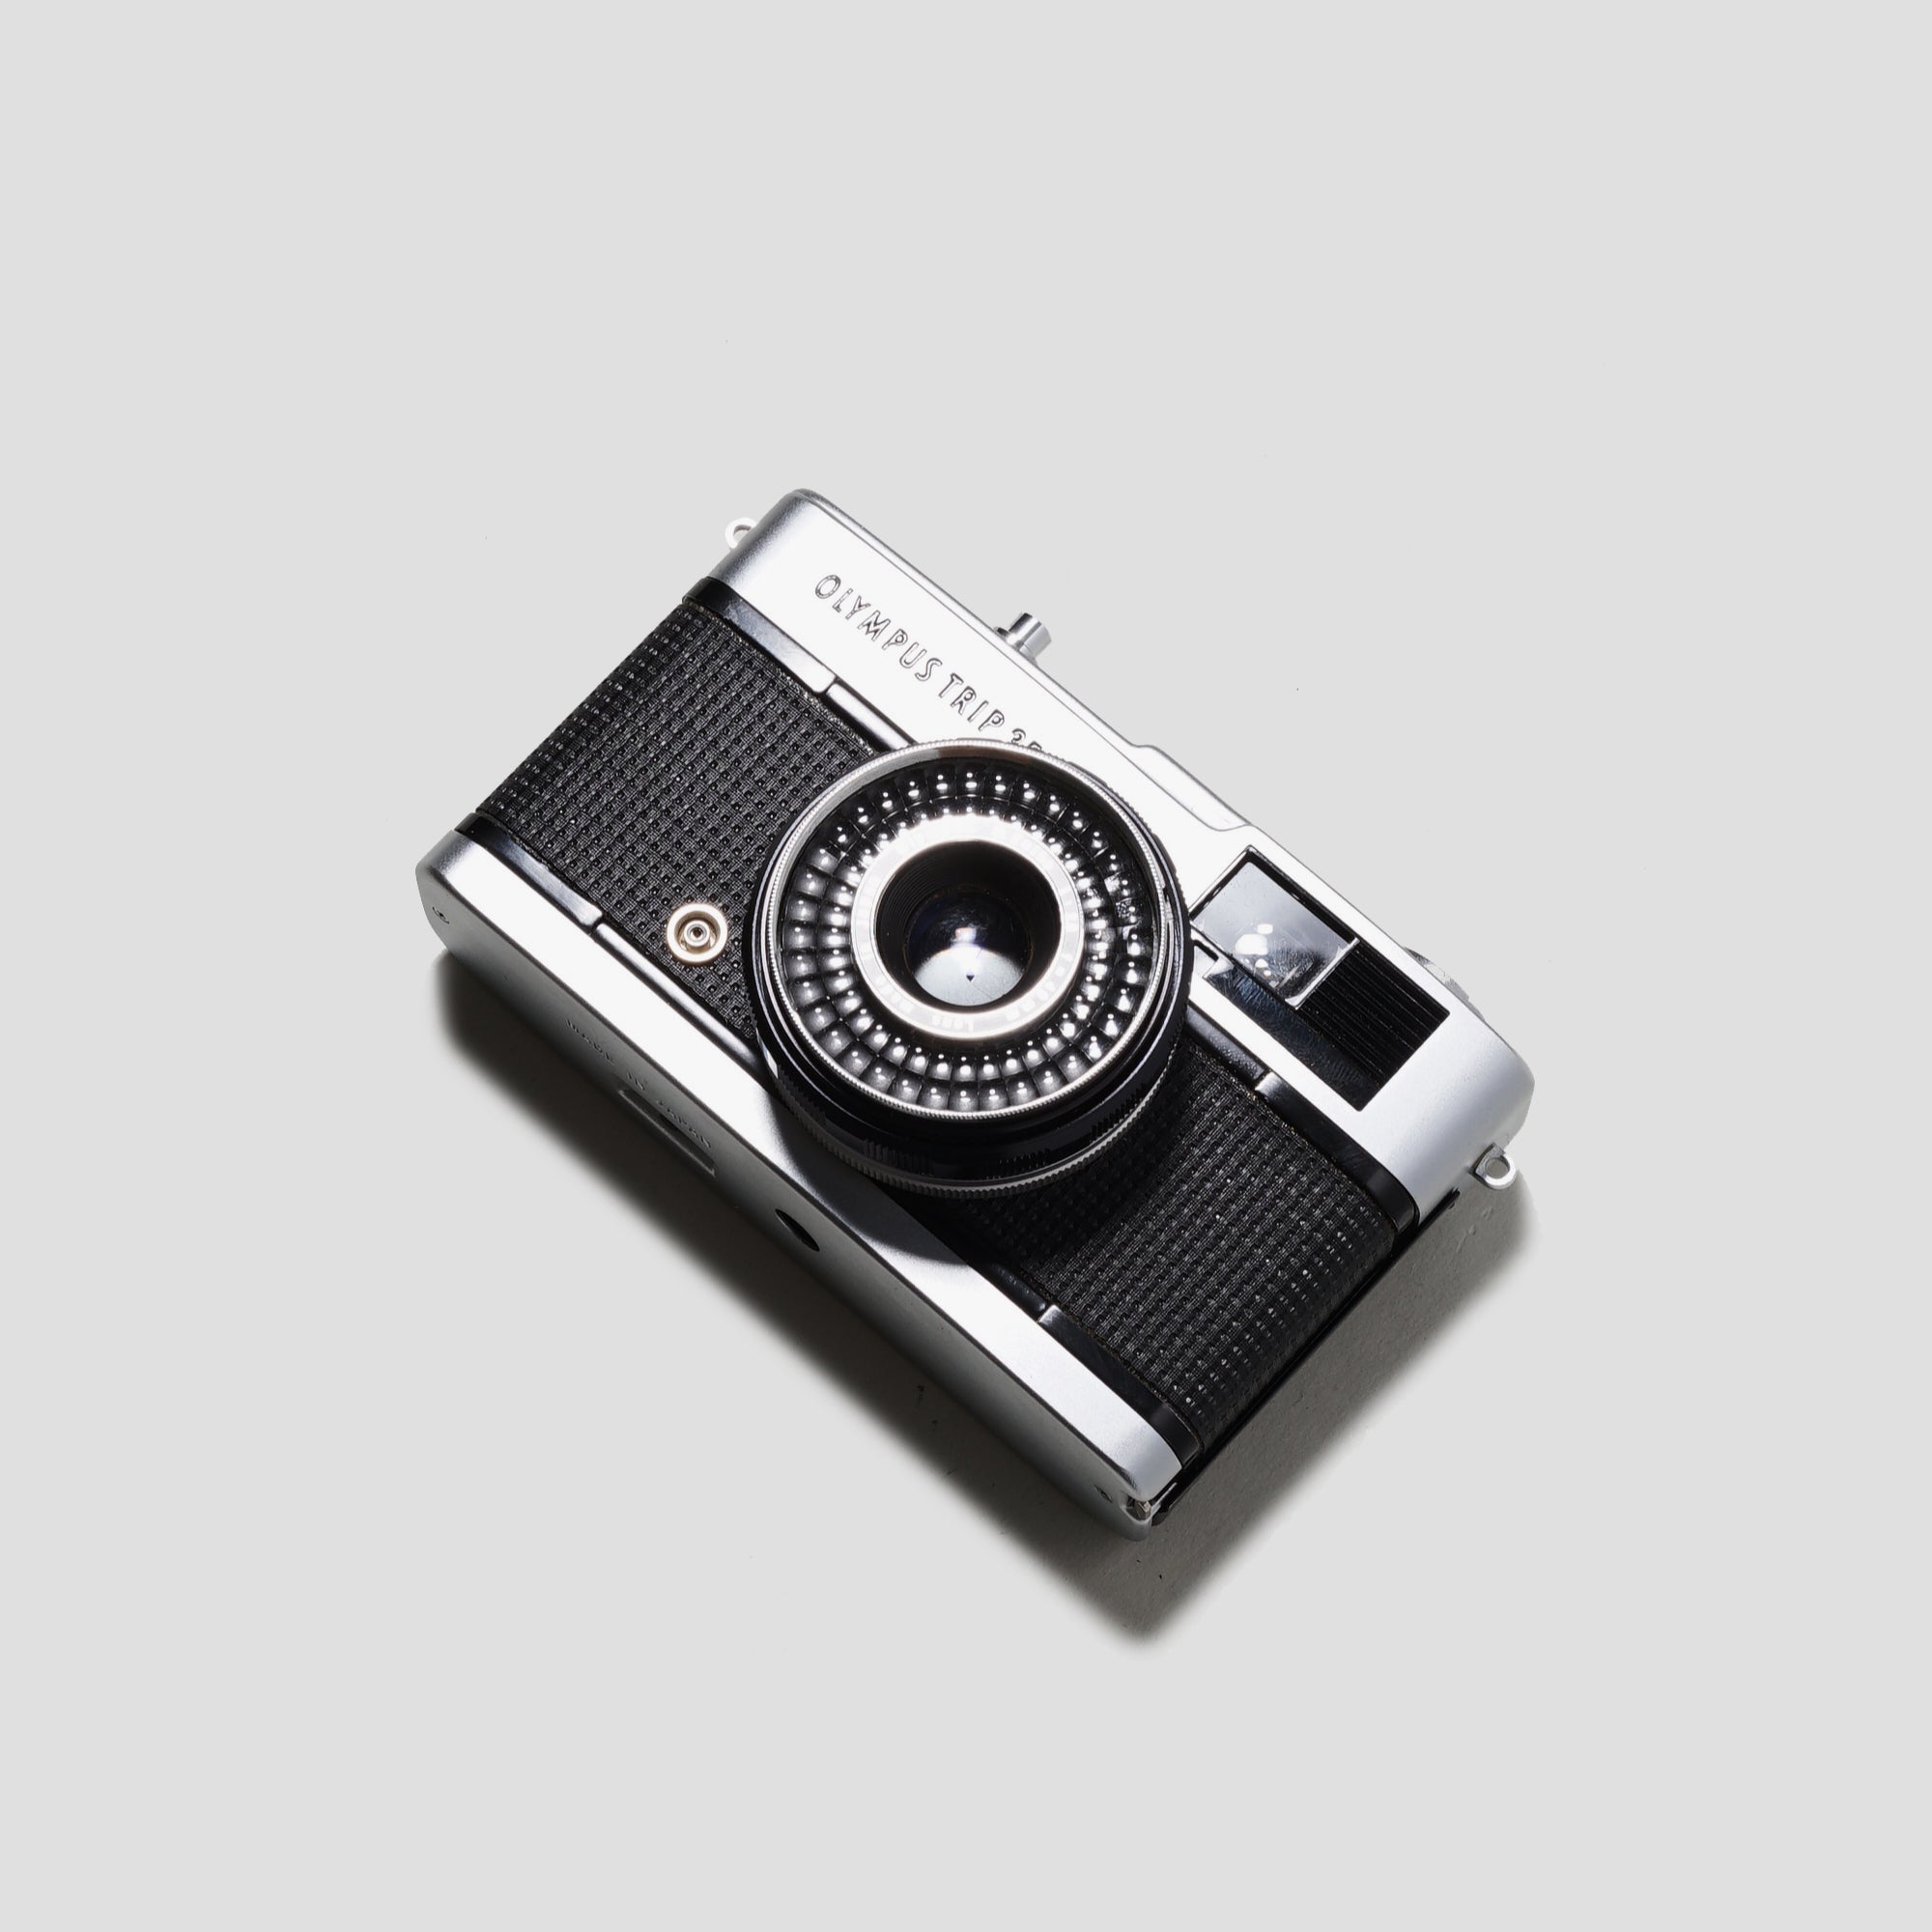 Buy Olympus Trip 35 now at Analogue Amsterdam